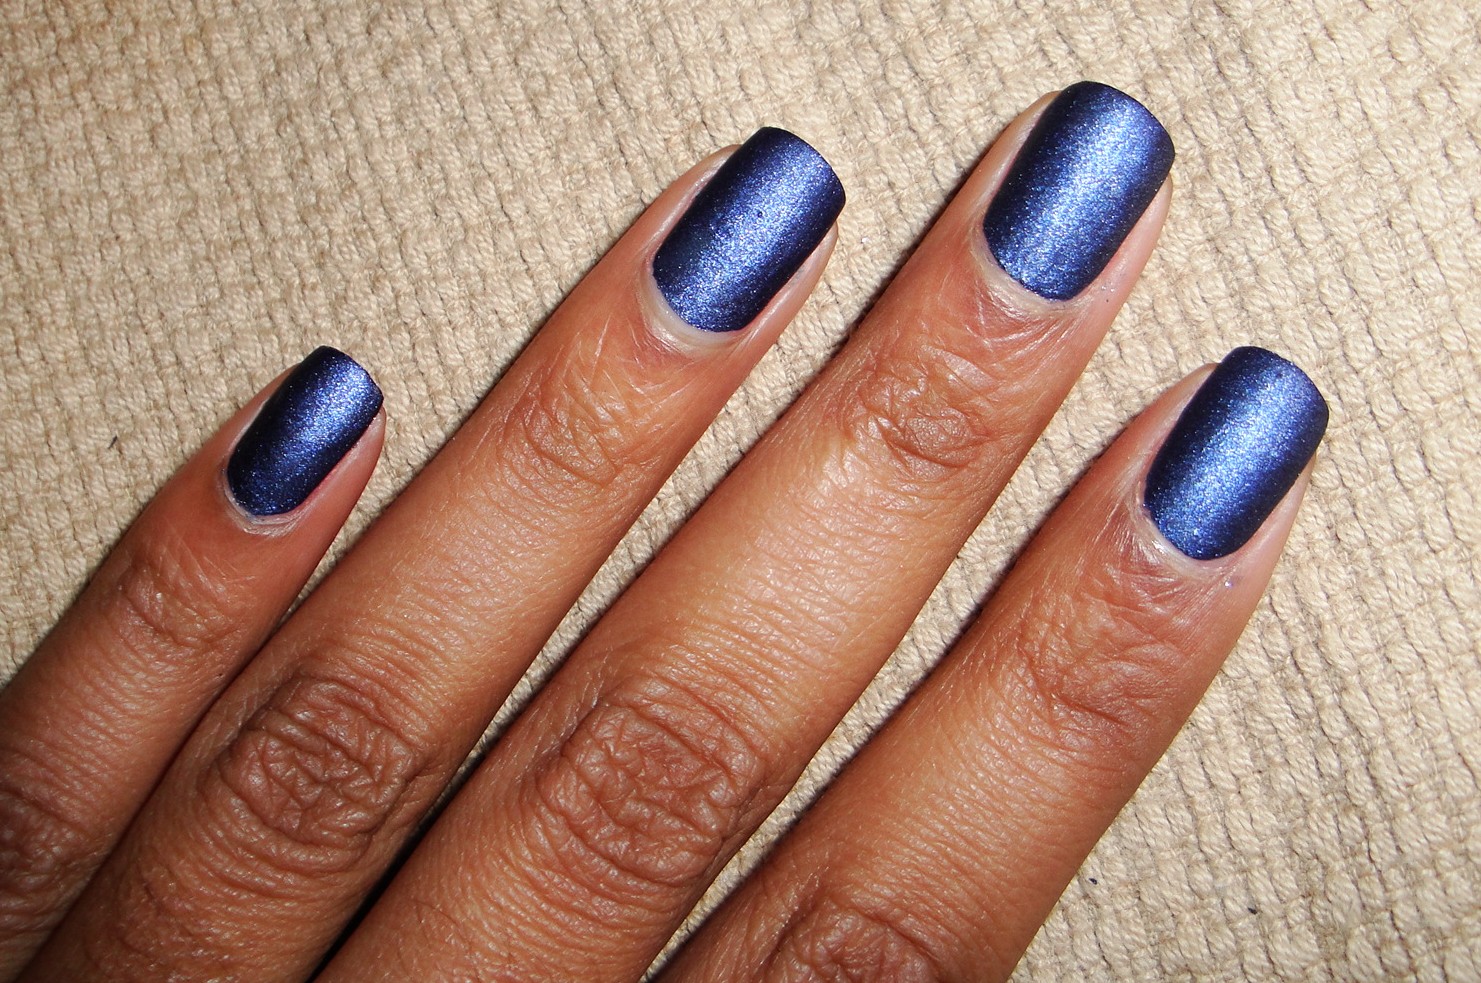 9. OPI Nail Lacquer - Russian Navy - wide 3